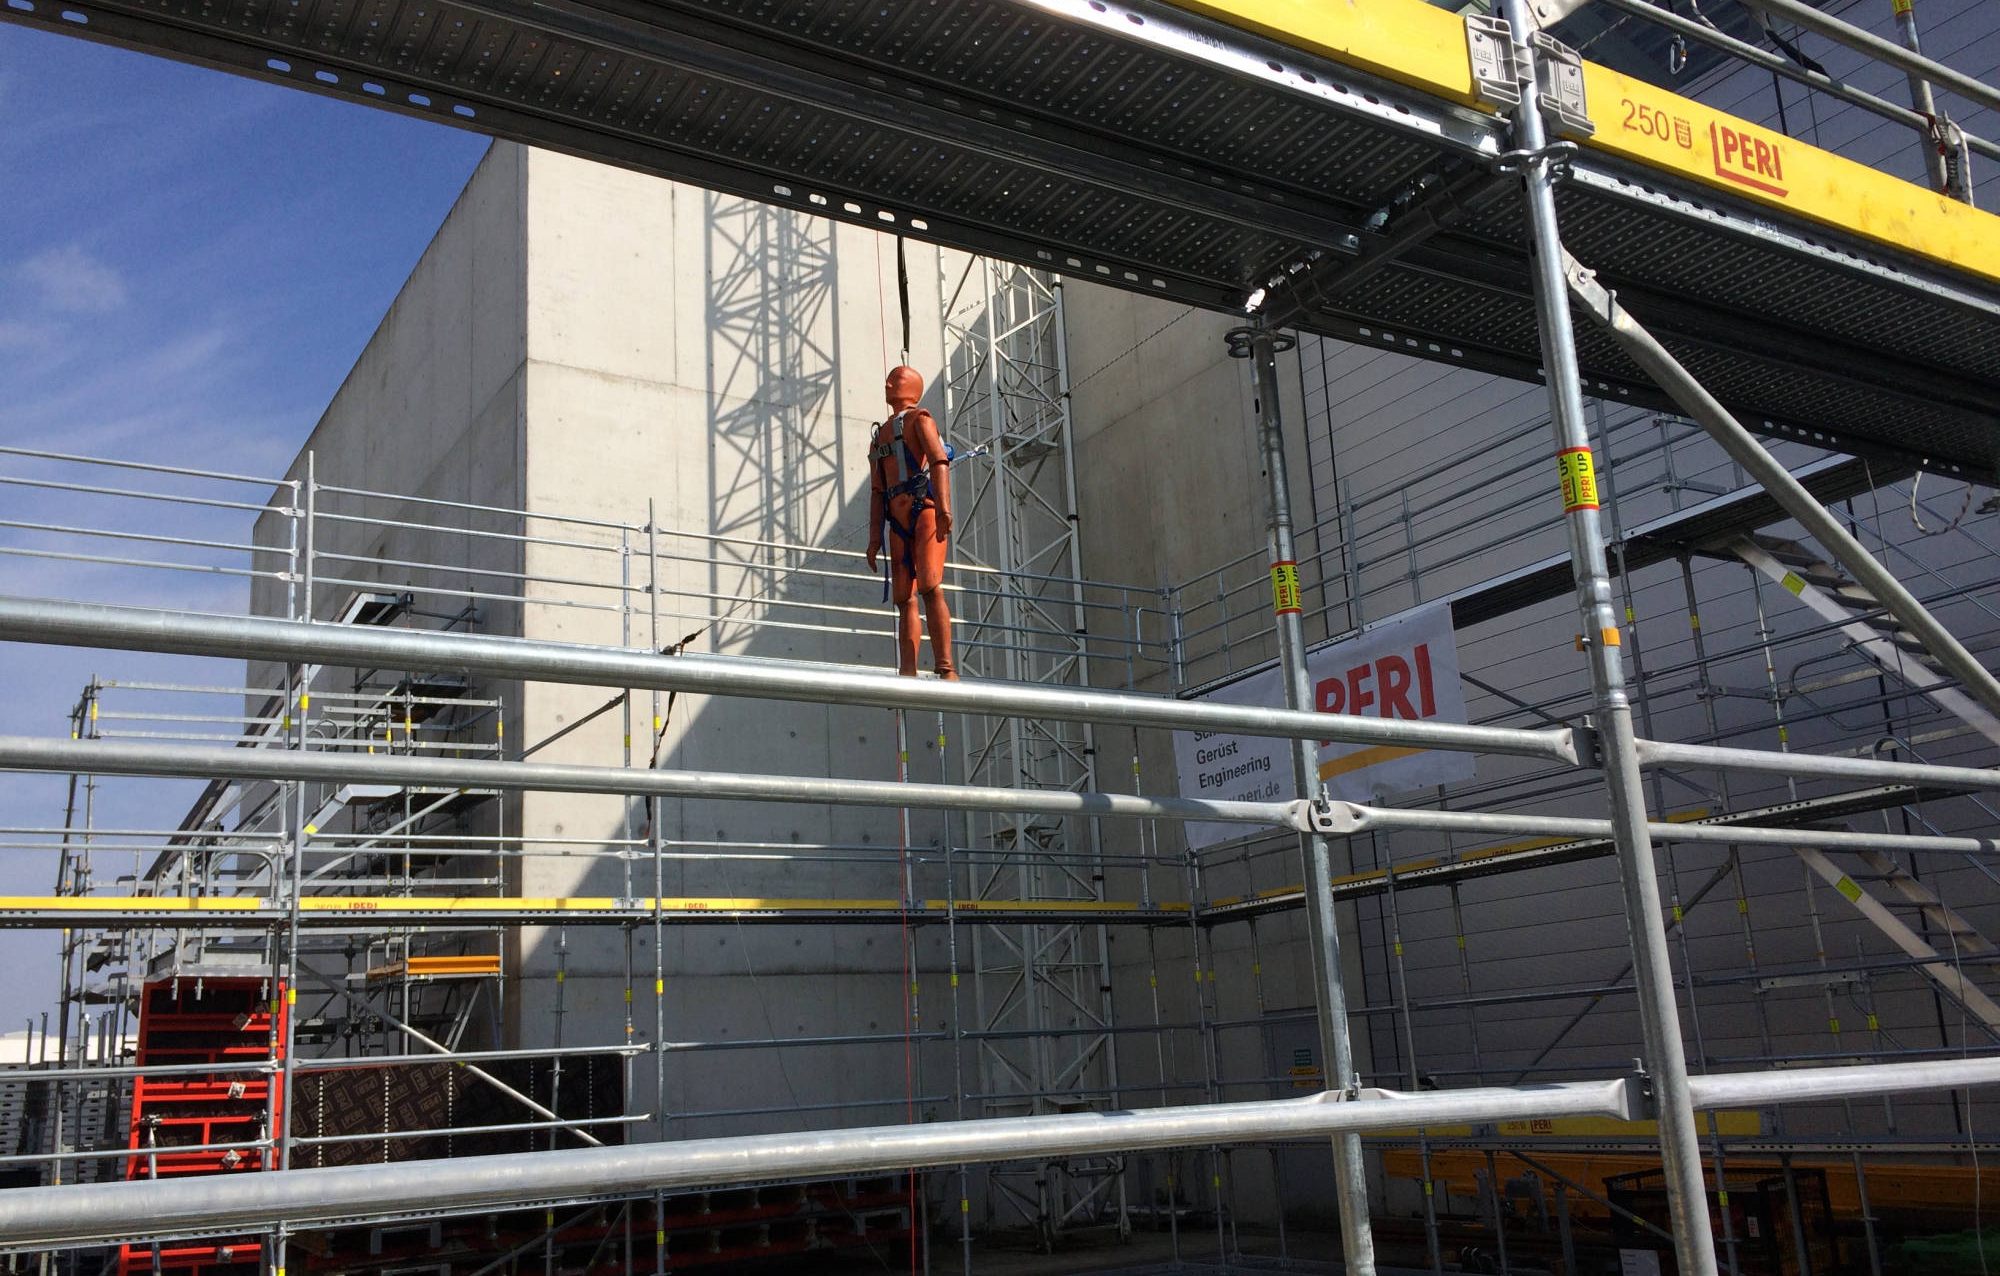 Fall protection for scaffolders and industry